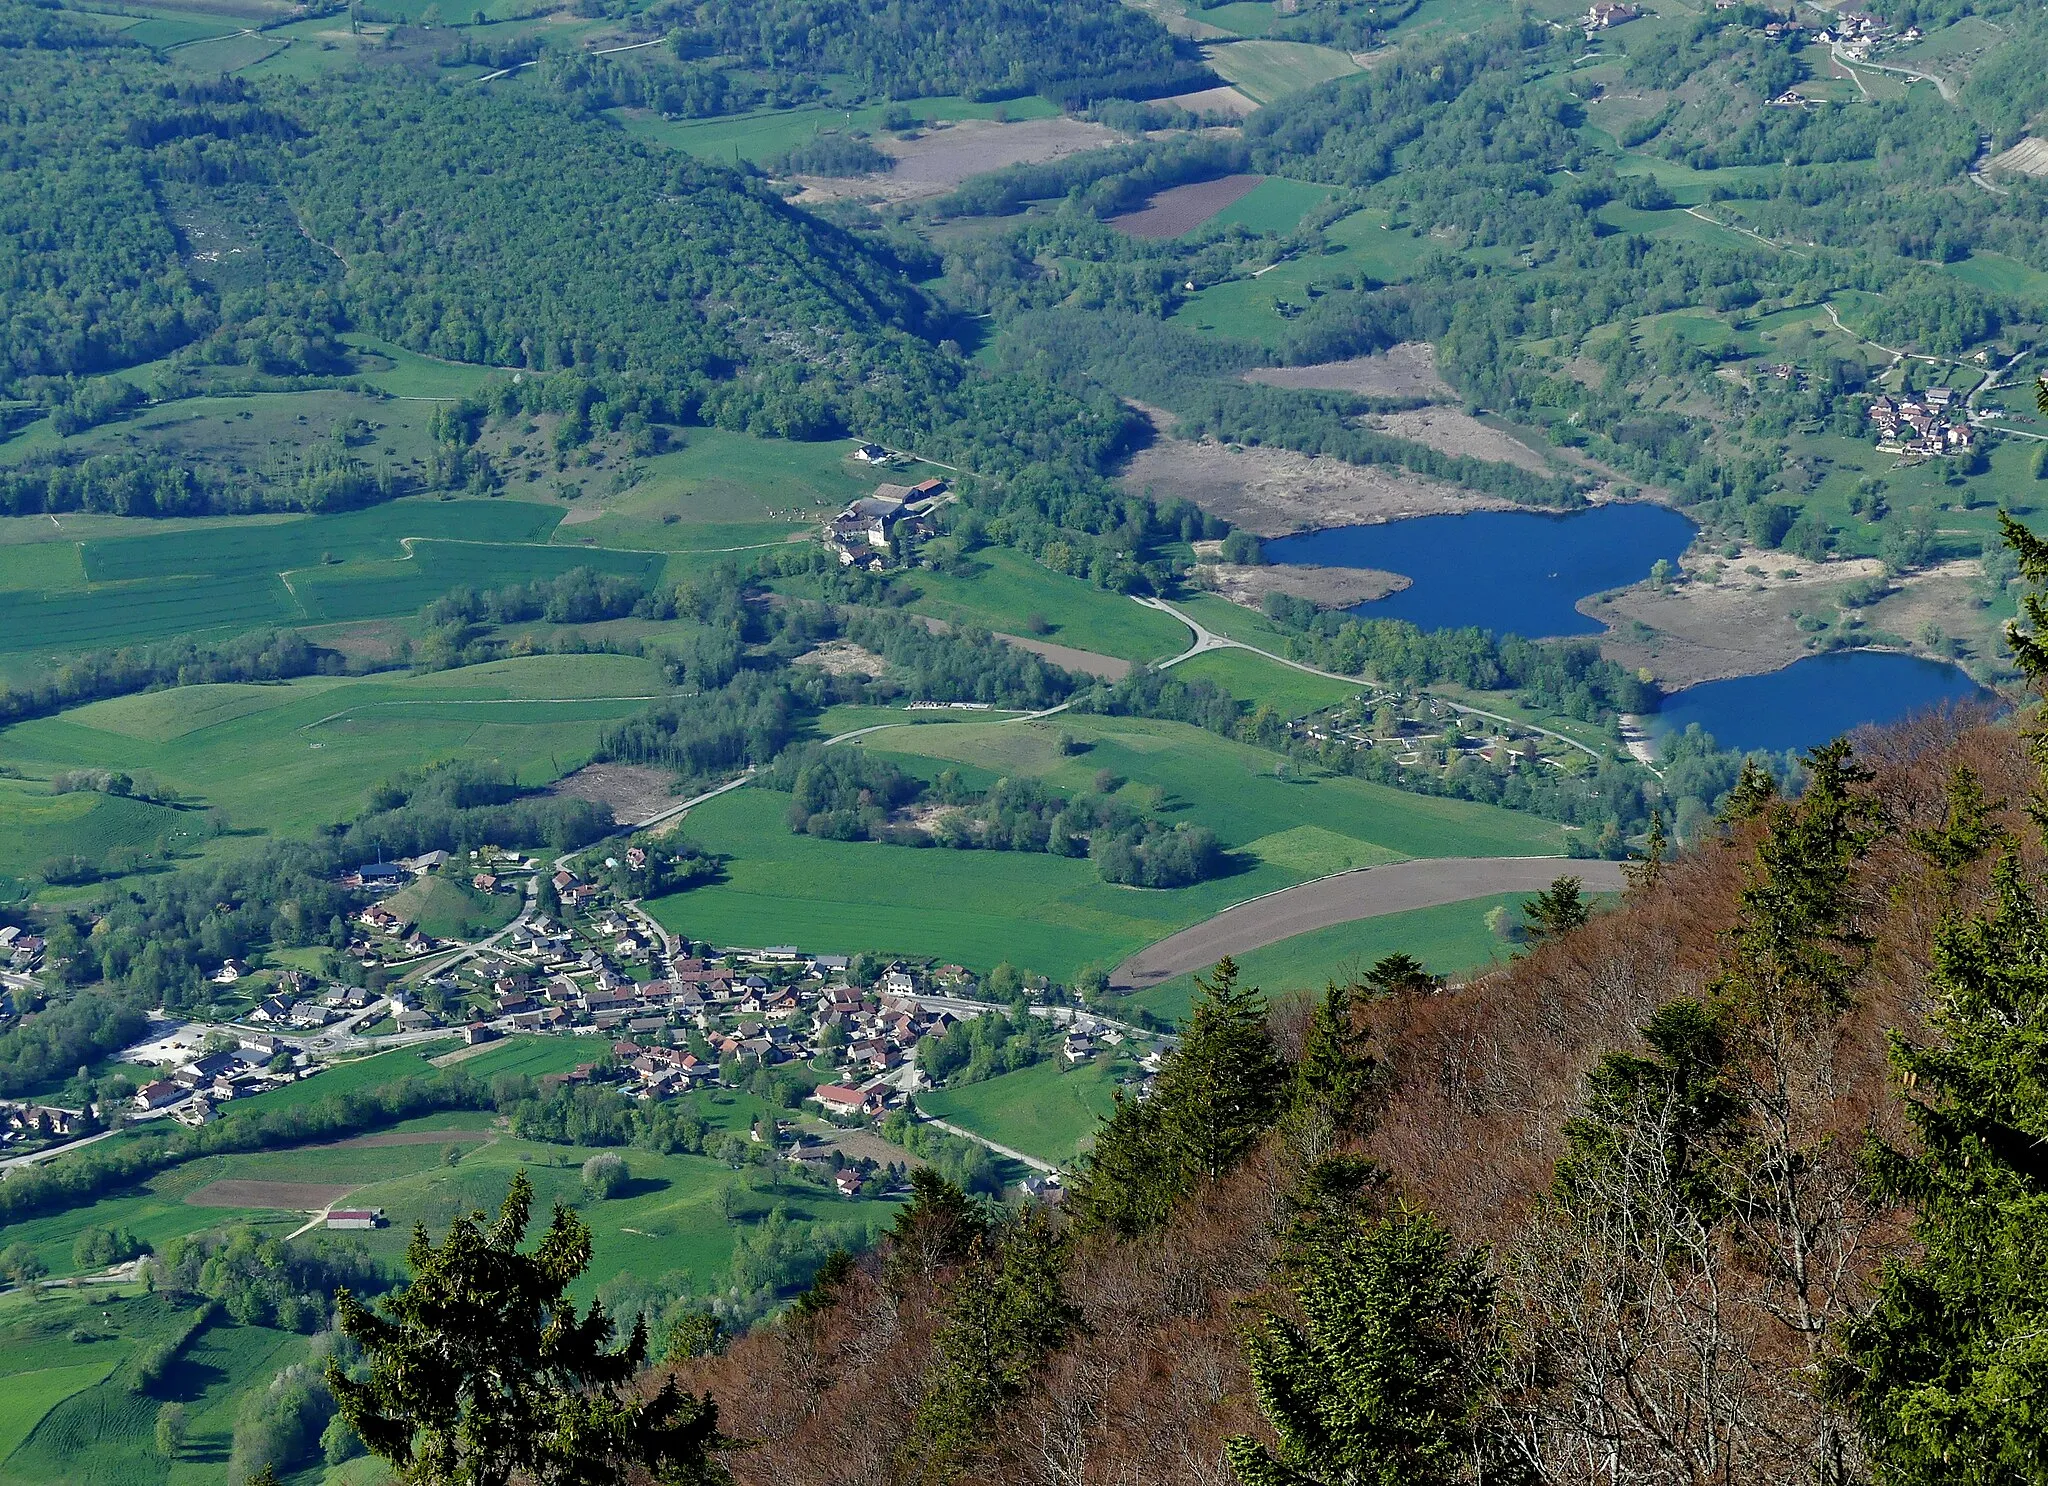 Photo showing: Sight, from the top of the Mont du Chat mountain (1,500 meters high), of Saint-Jean-de-Chevelu village and its two surrounding lakes, in Savoie, France.